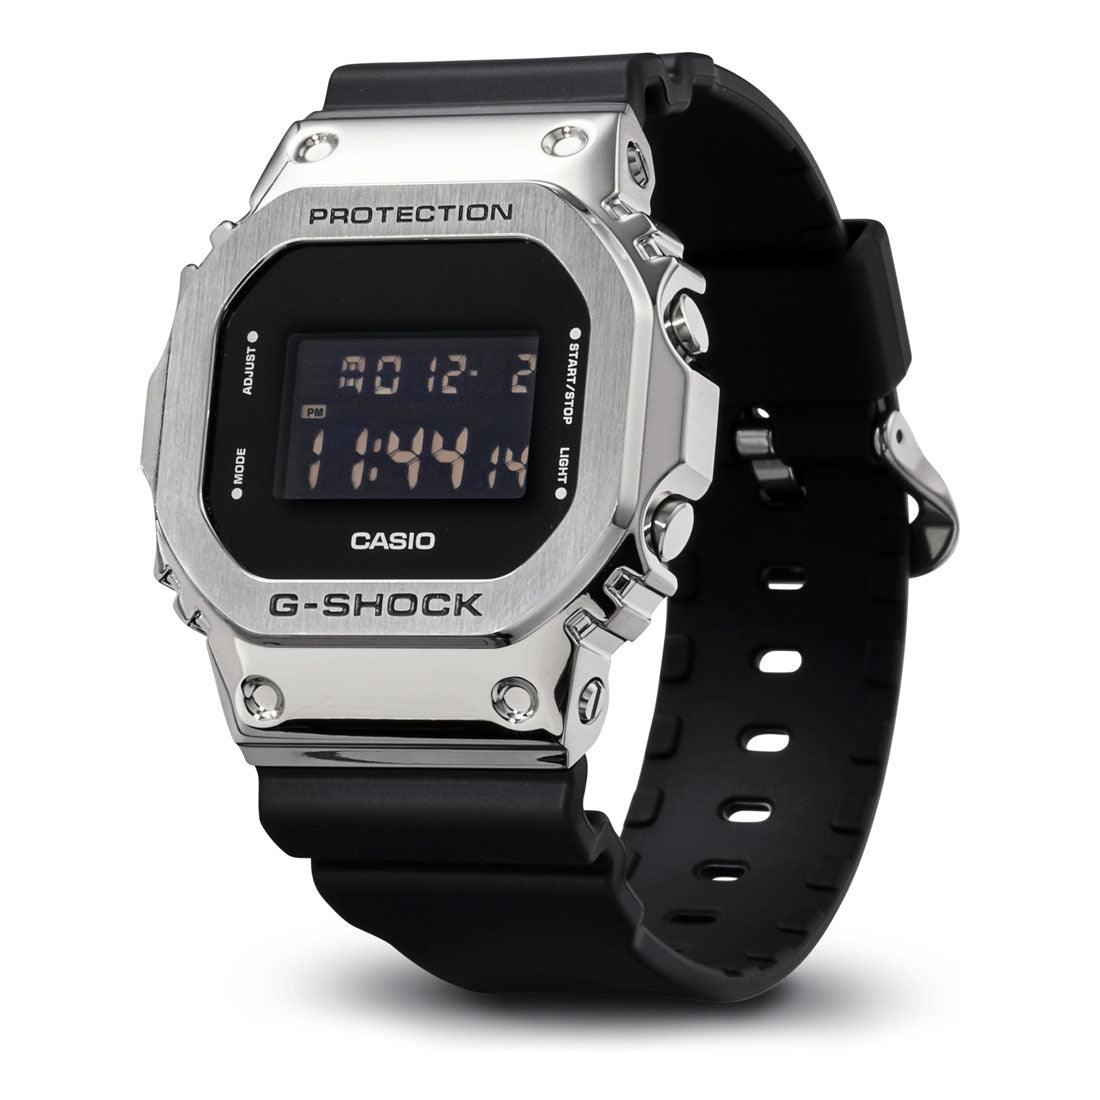 Introducing the G-Shock GM-5600 (Capped) in Stainless Steel